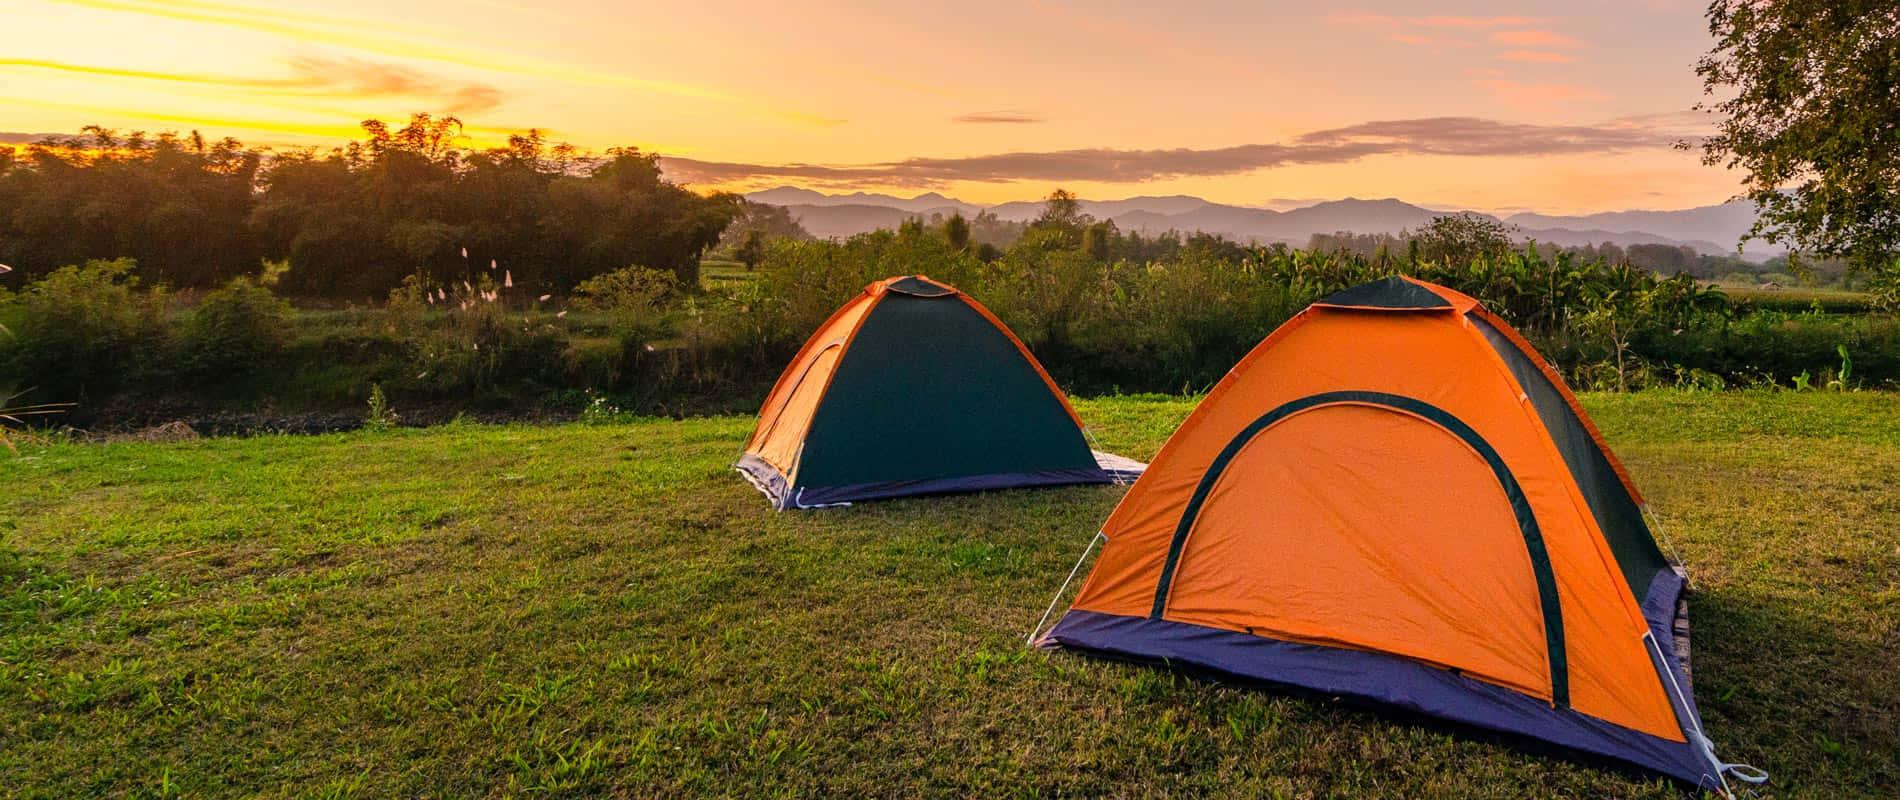 Two Tents Set Up In The Grass At Sunset